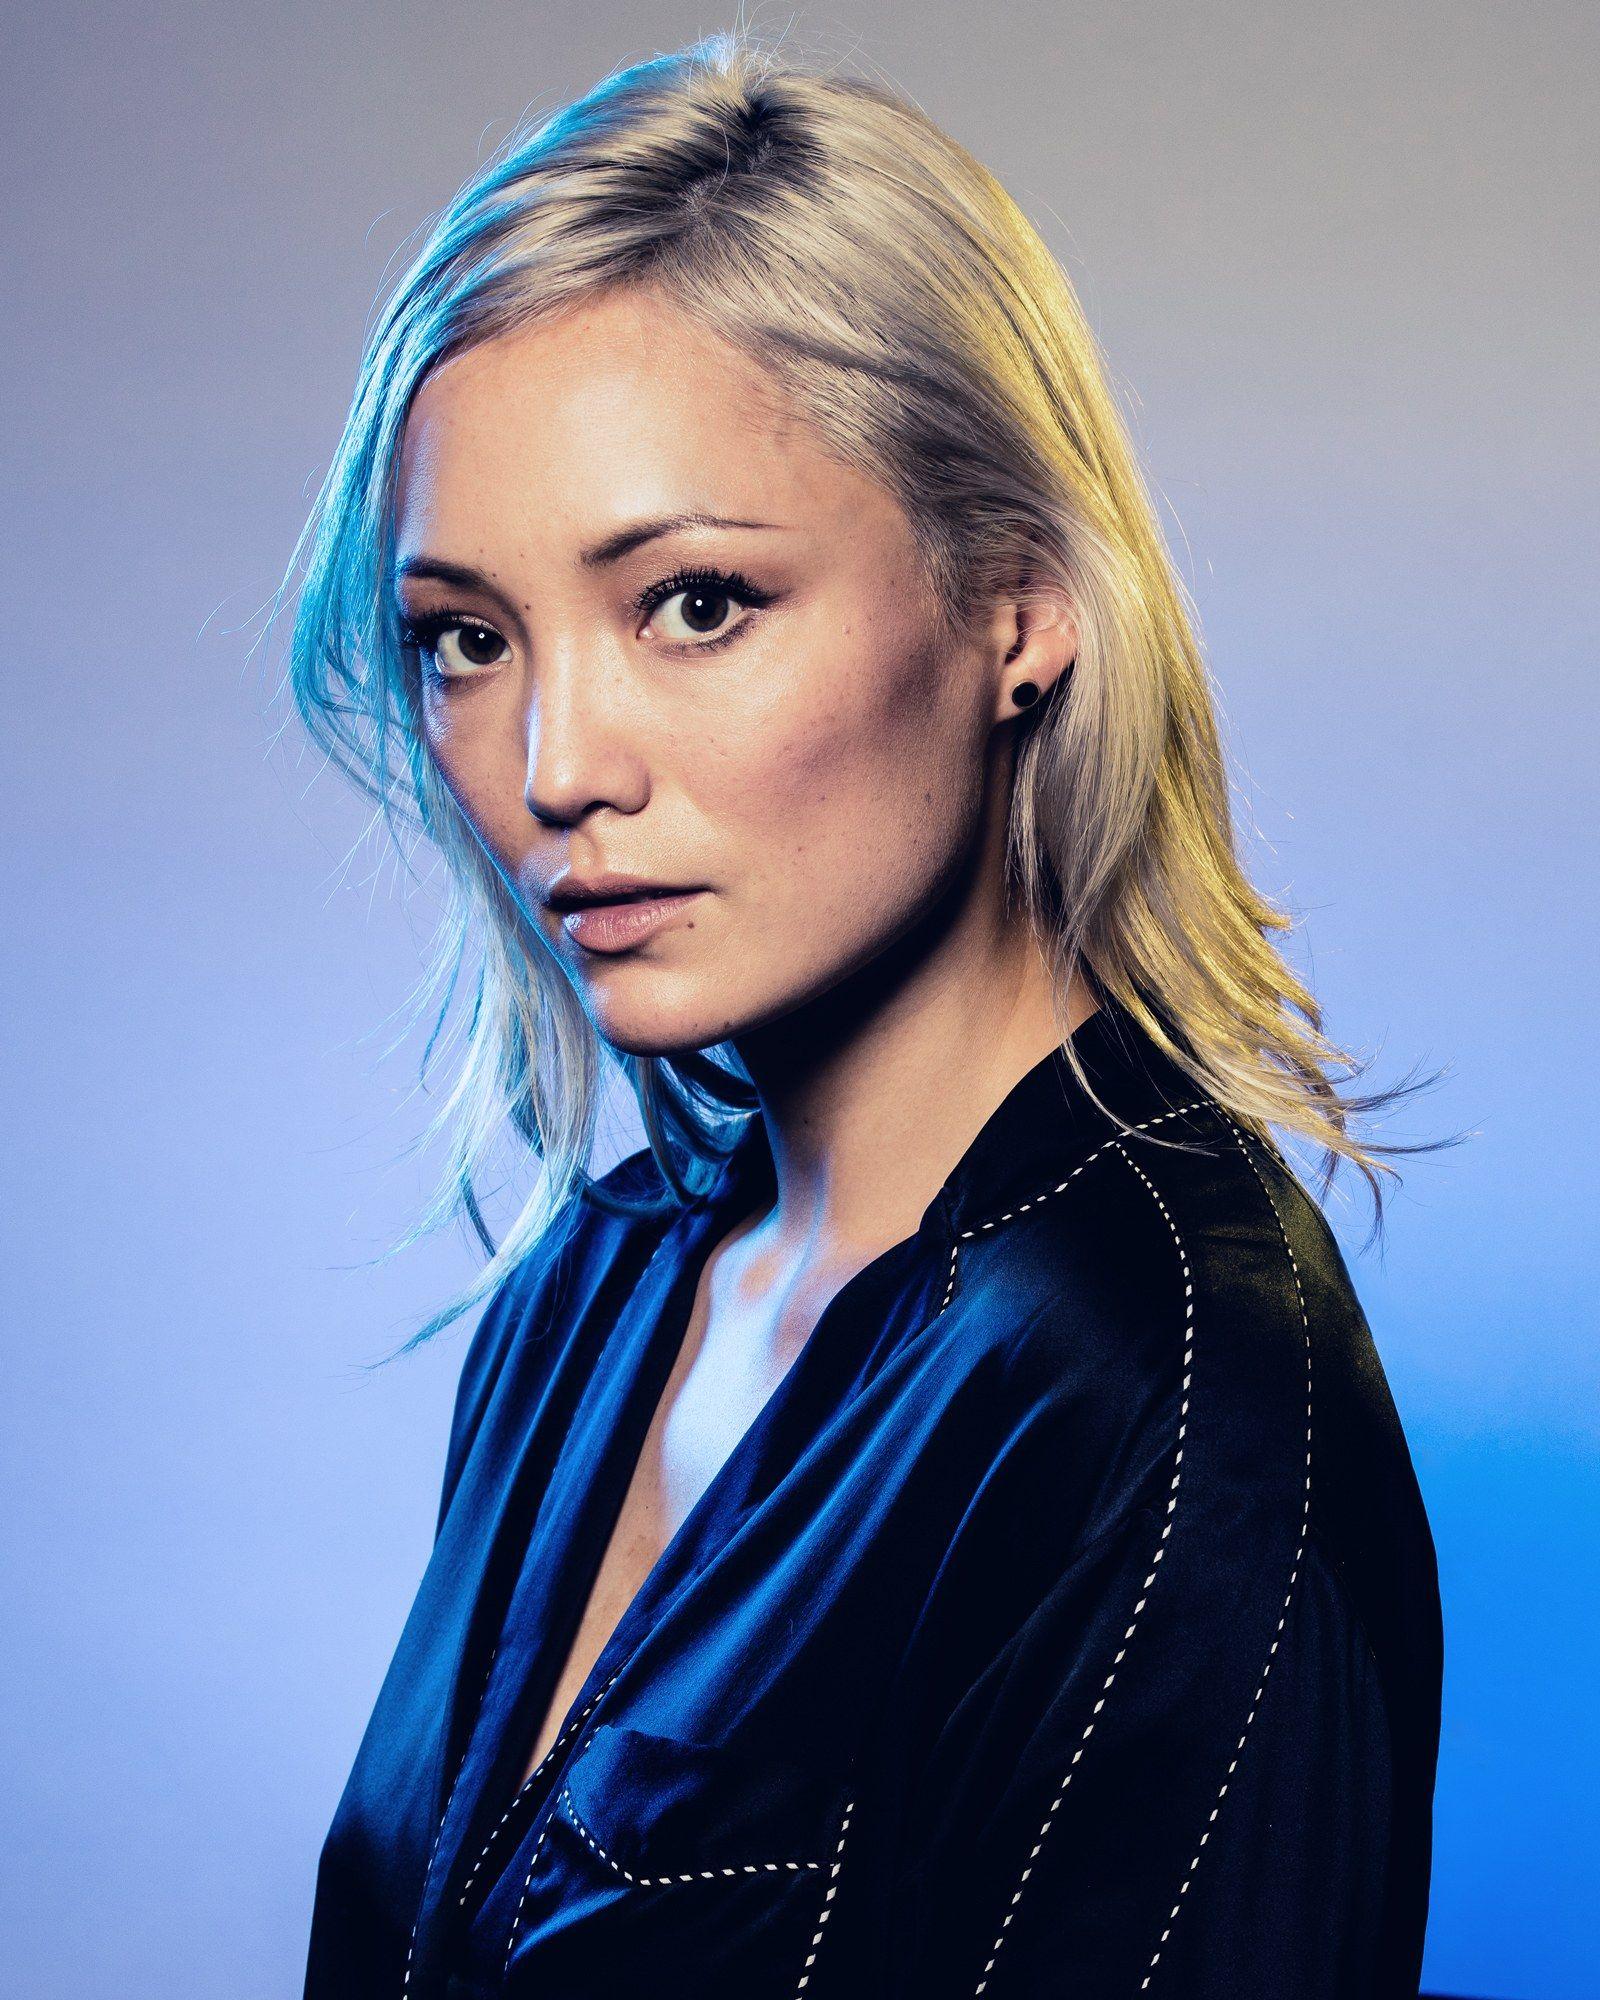 75+ Hot Pictures Of Pom Klementieff Who Plays Mantis In Marvel Cinematic Universe | Best Of Comic Books